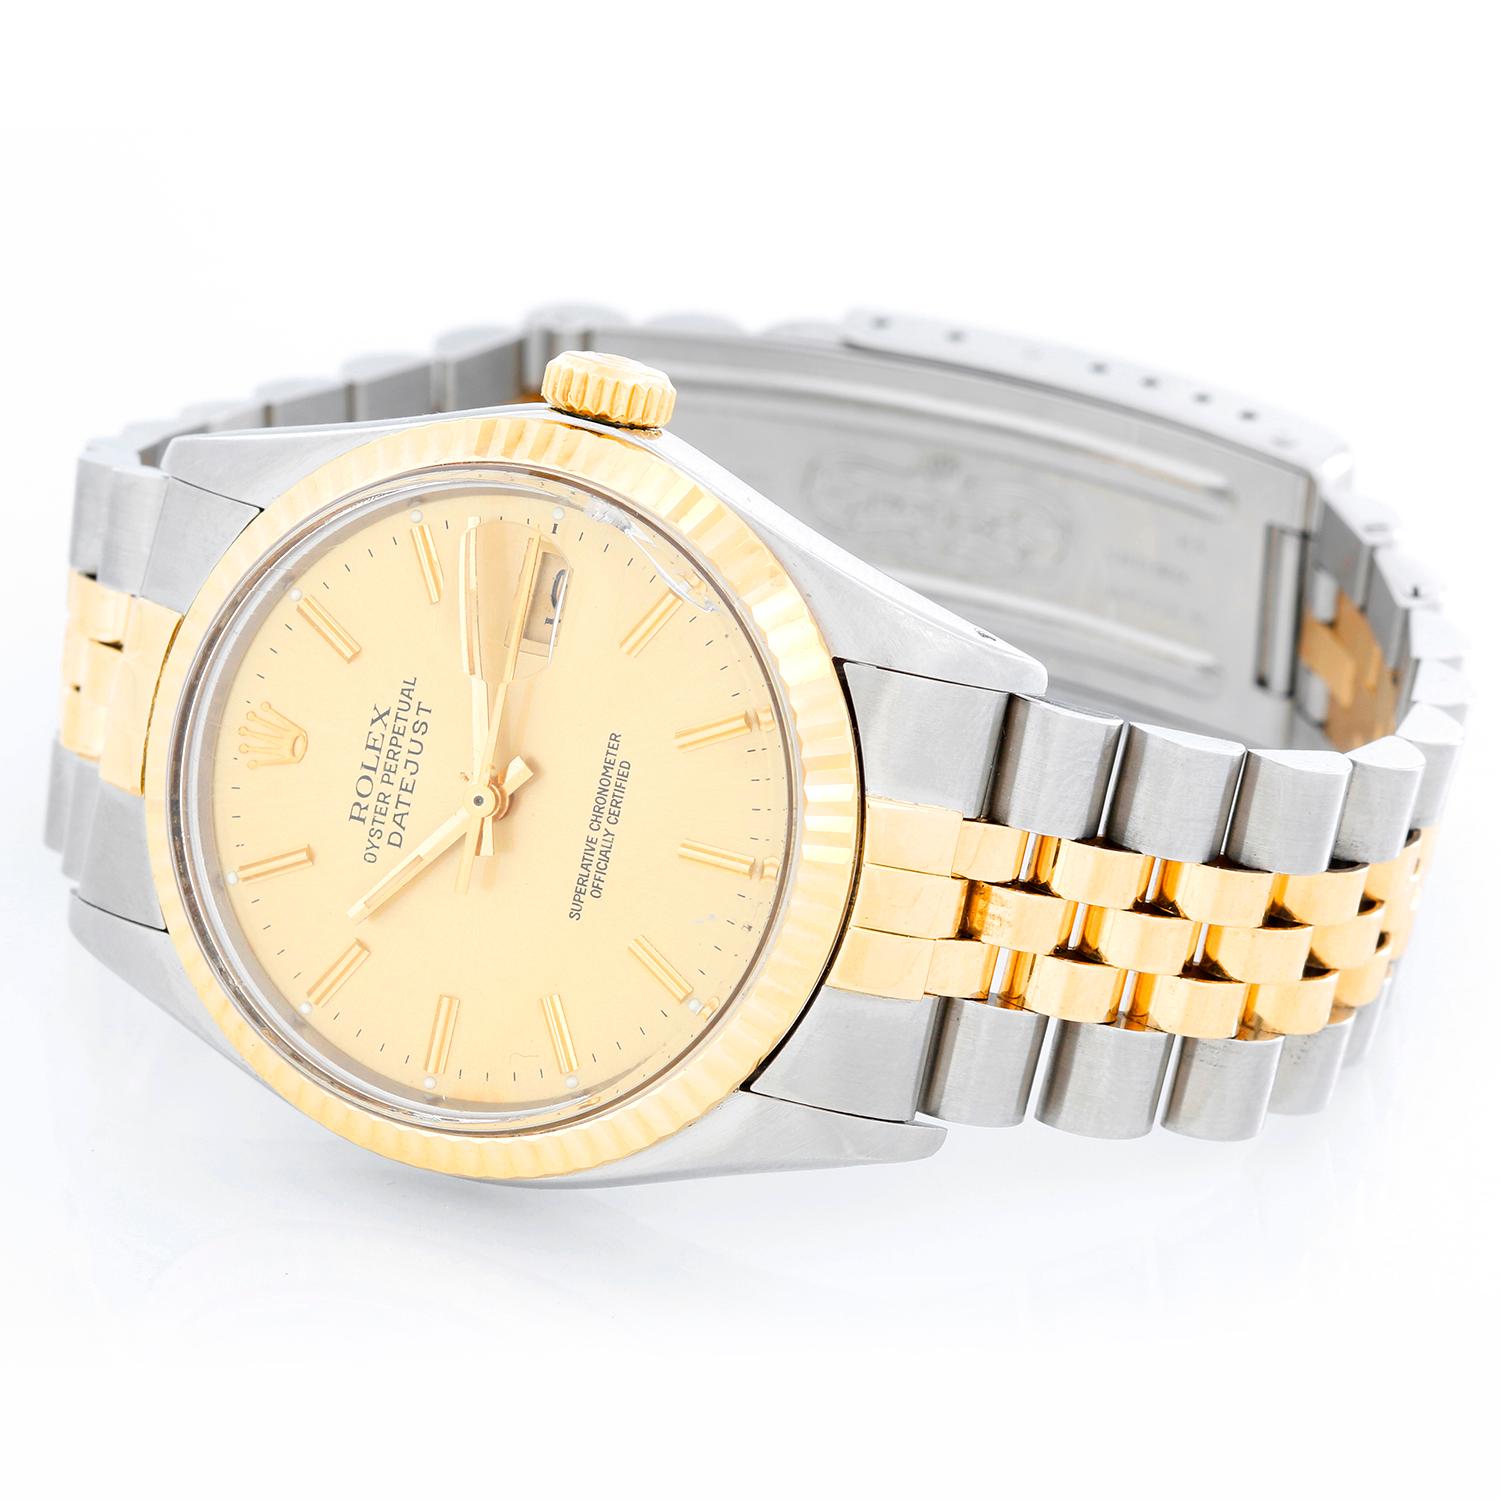 Men's Rolex Datejust 2-Tone Watch 16103 - Automatic winding, 27 jewels, Quickset, acrylic crystal. Stainless steel case with fluted  bezel ( 36 mm ). Champagne dial with stick hour markers. Stainless steel and 18k yellow gold Jubilee bracelet.